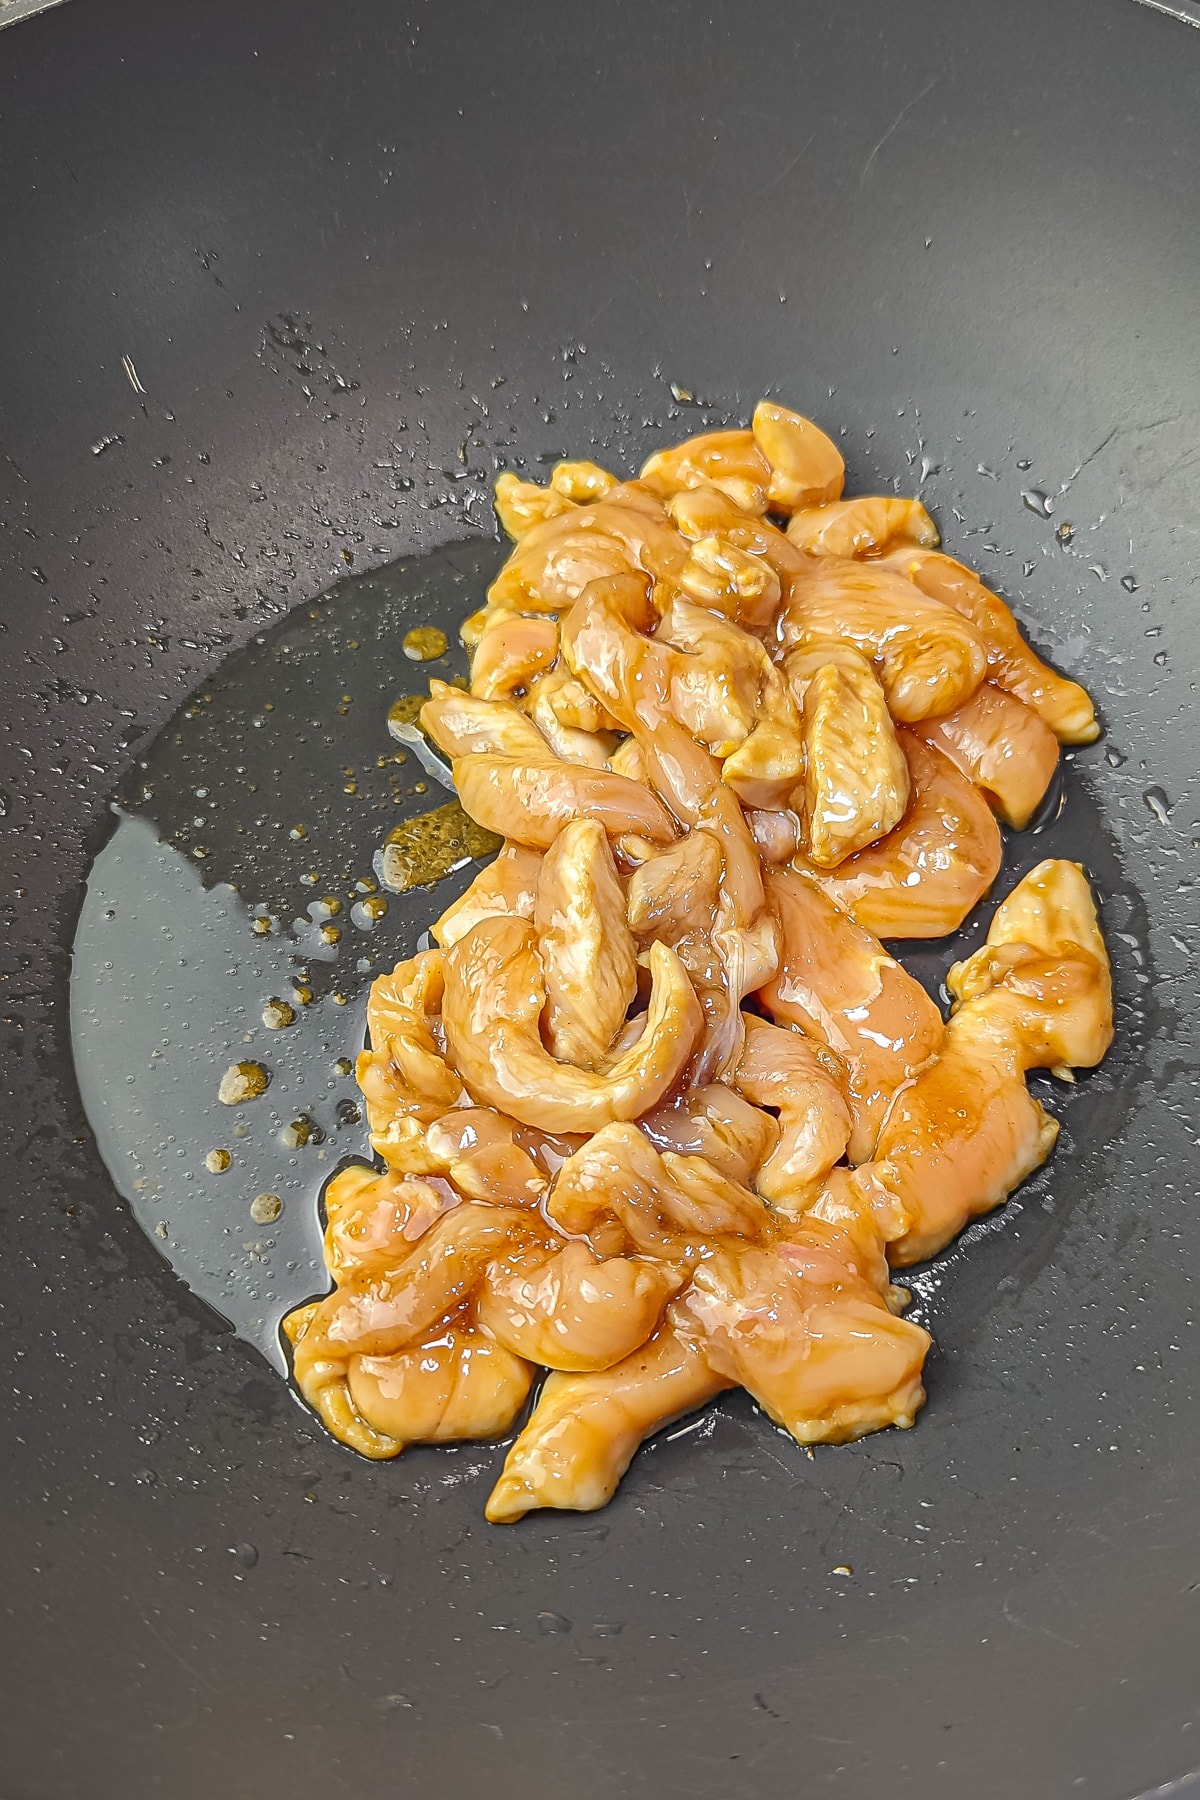 Sliced chicken breast cooking in a non-stick pan coated in teriyaki sauce..